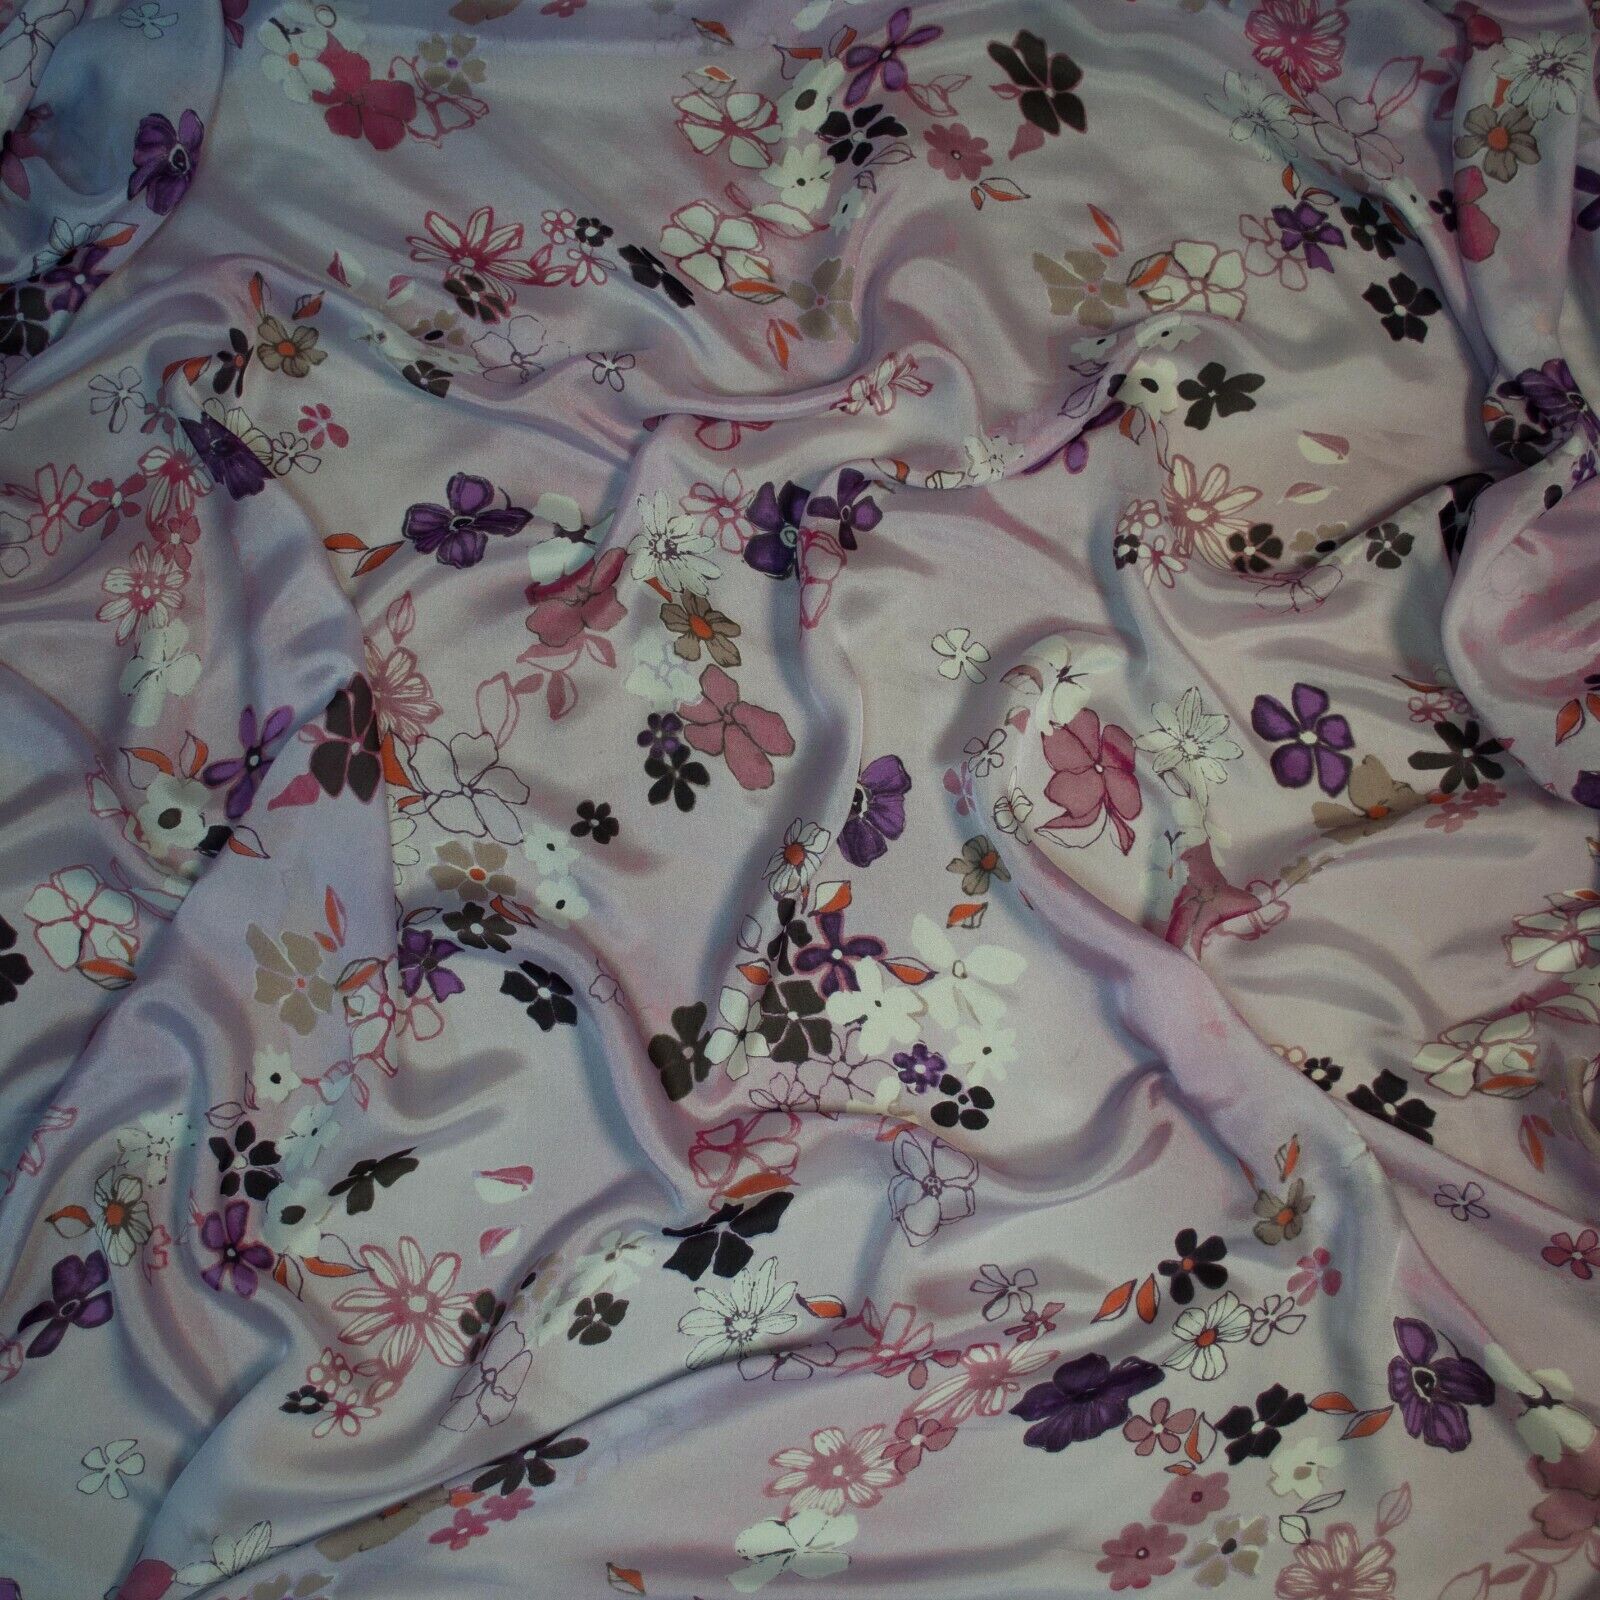 Designers pure mulberry silk fabric. Made in Italy. Violets print